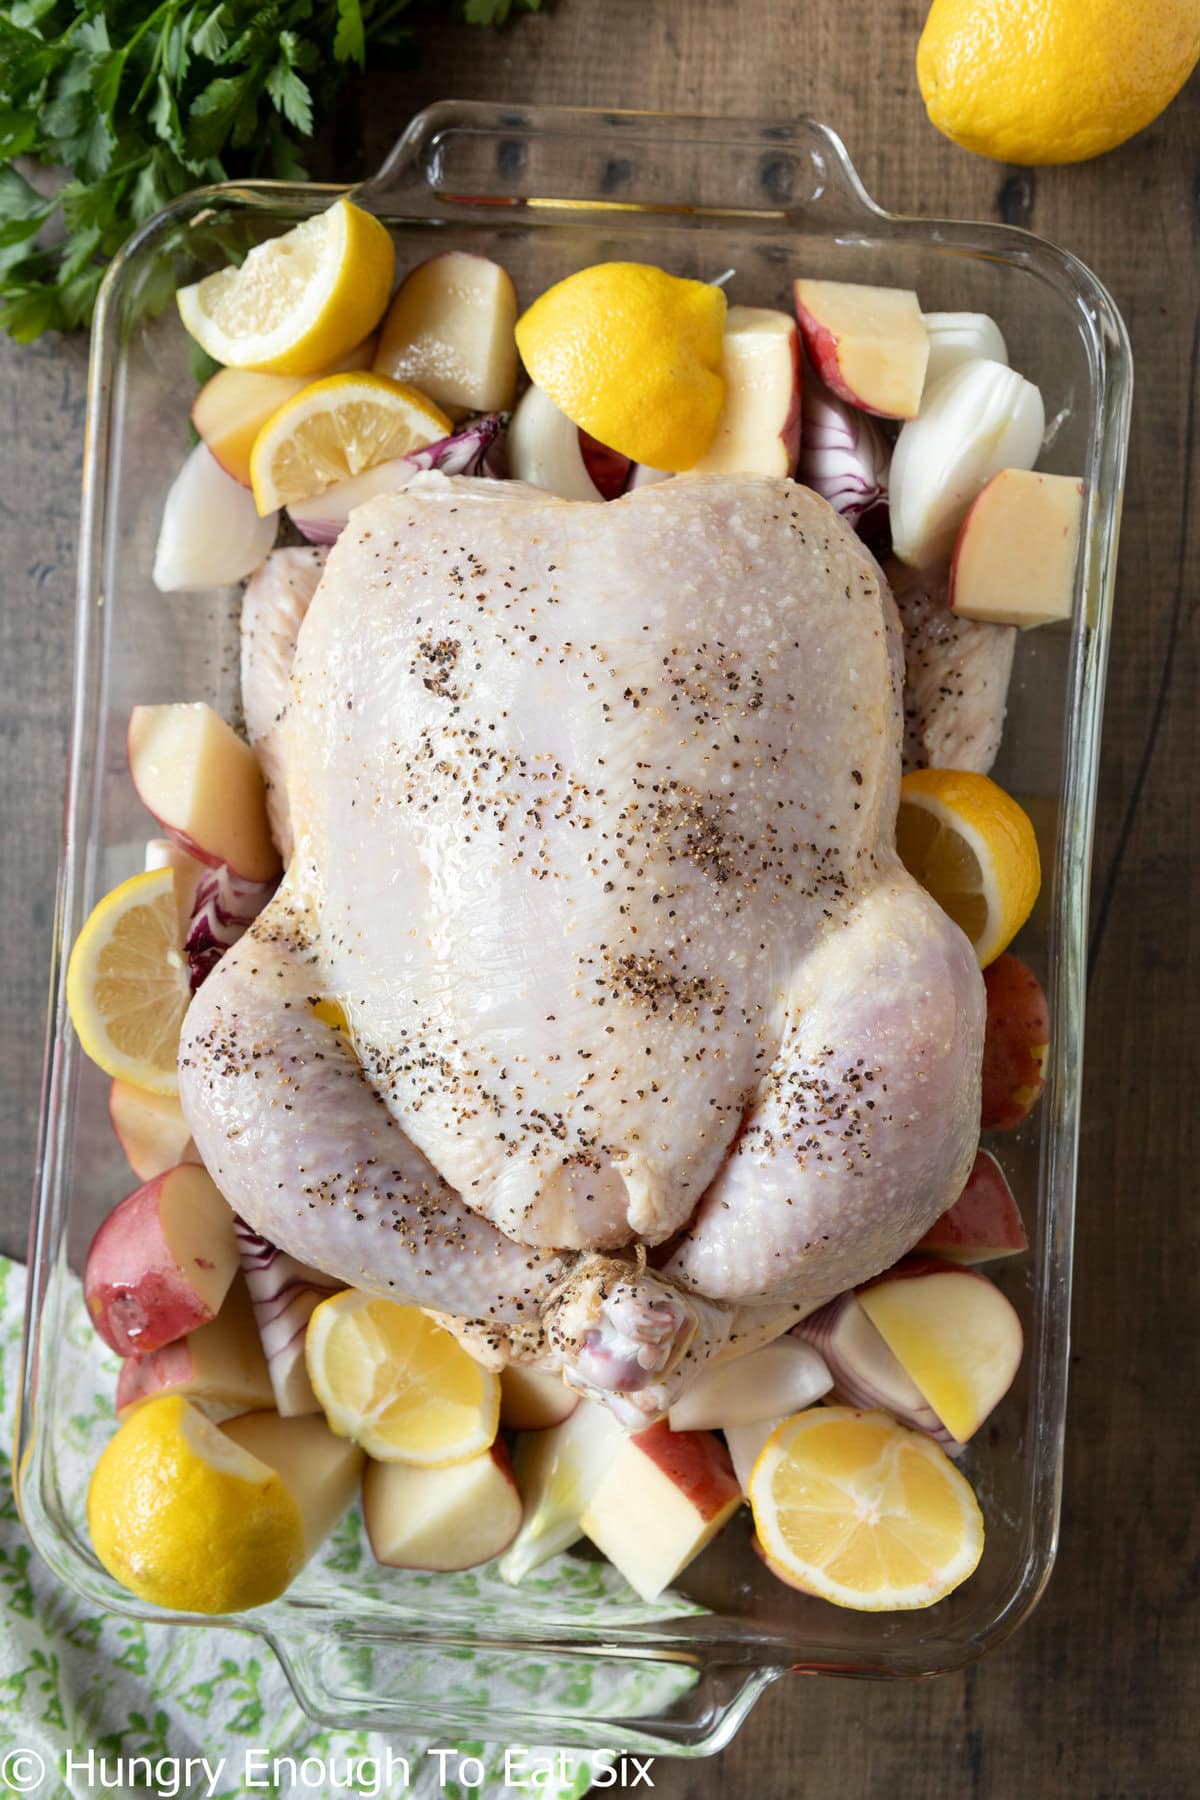 Whole chicken in a baking dish with lemons and potatoes.